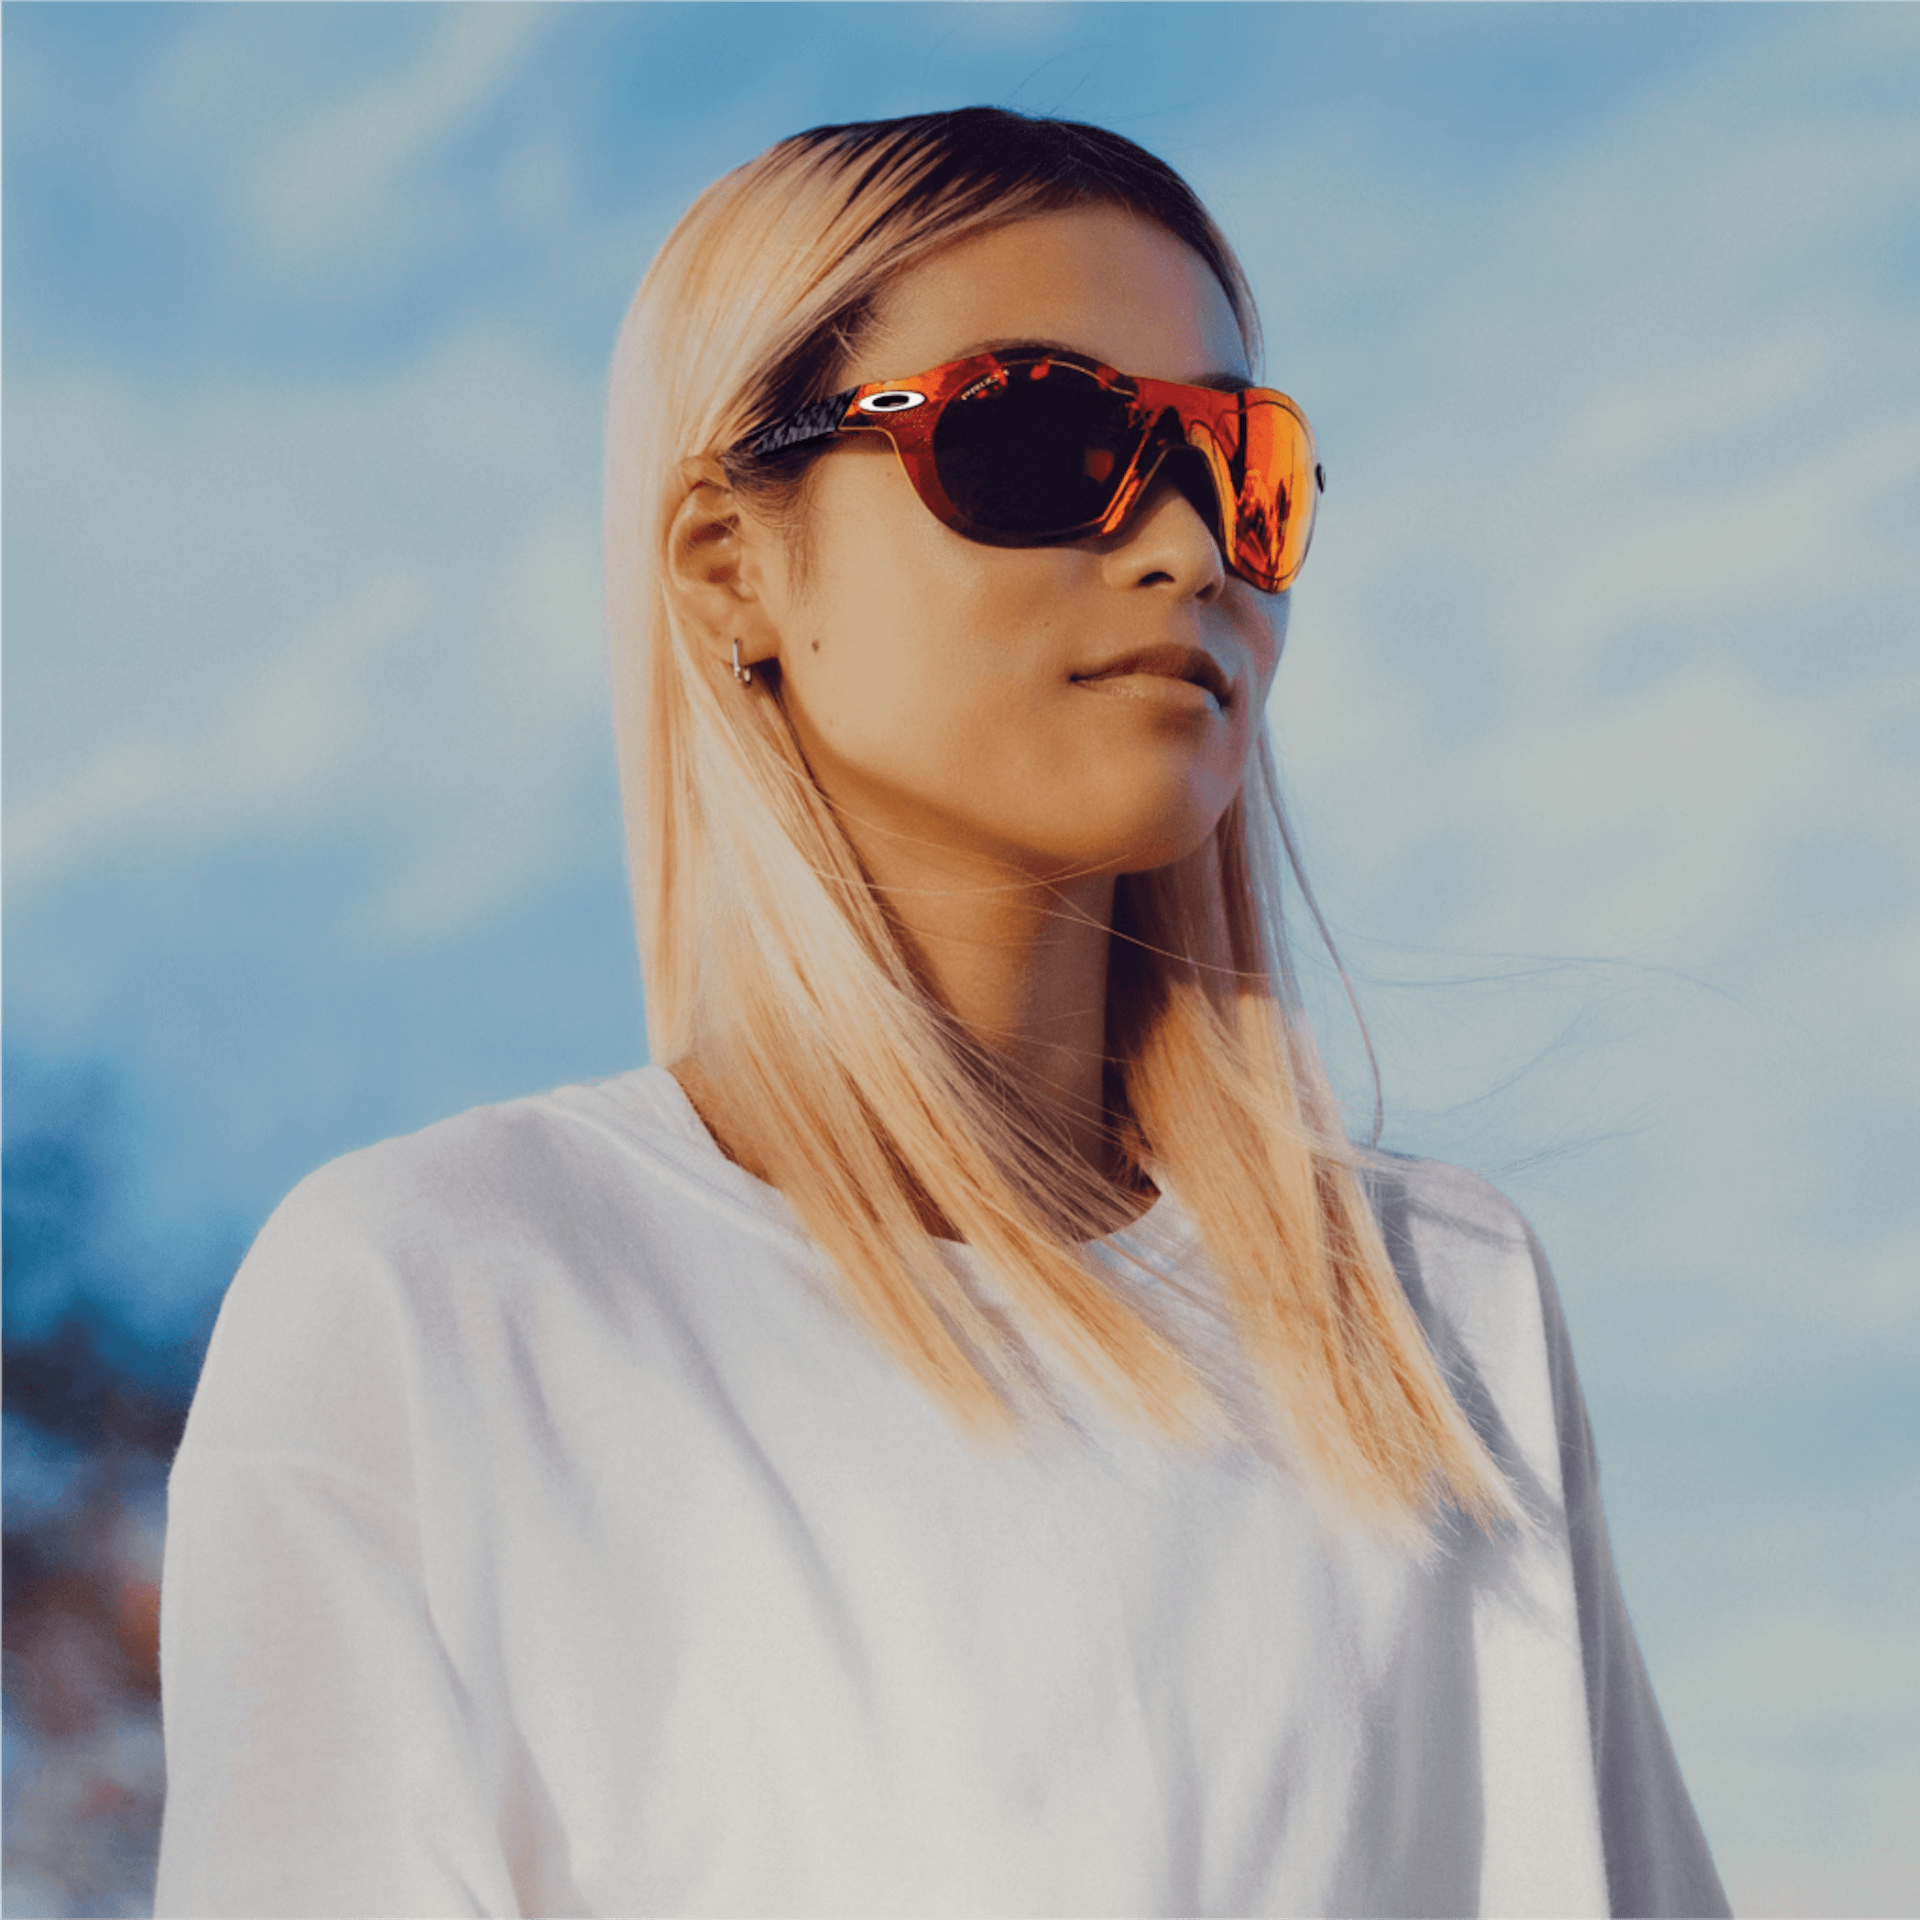 The best sunglasses for adventure travel